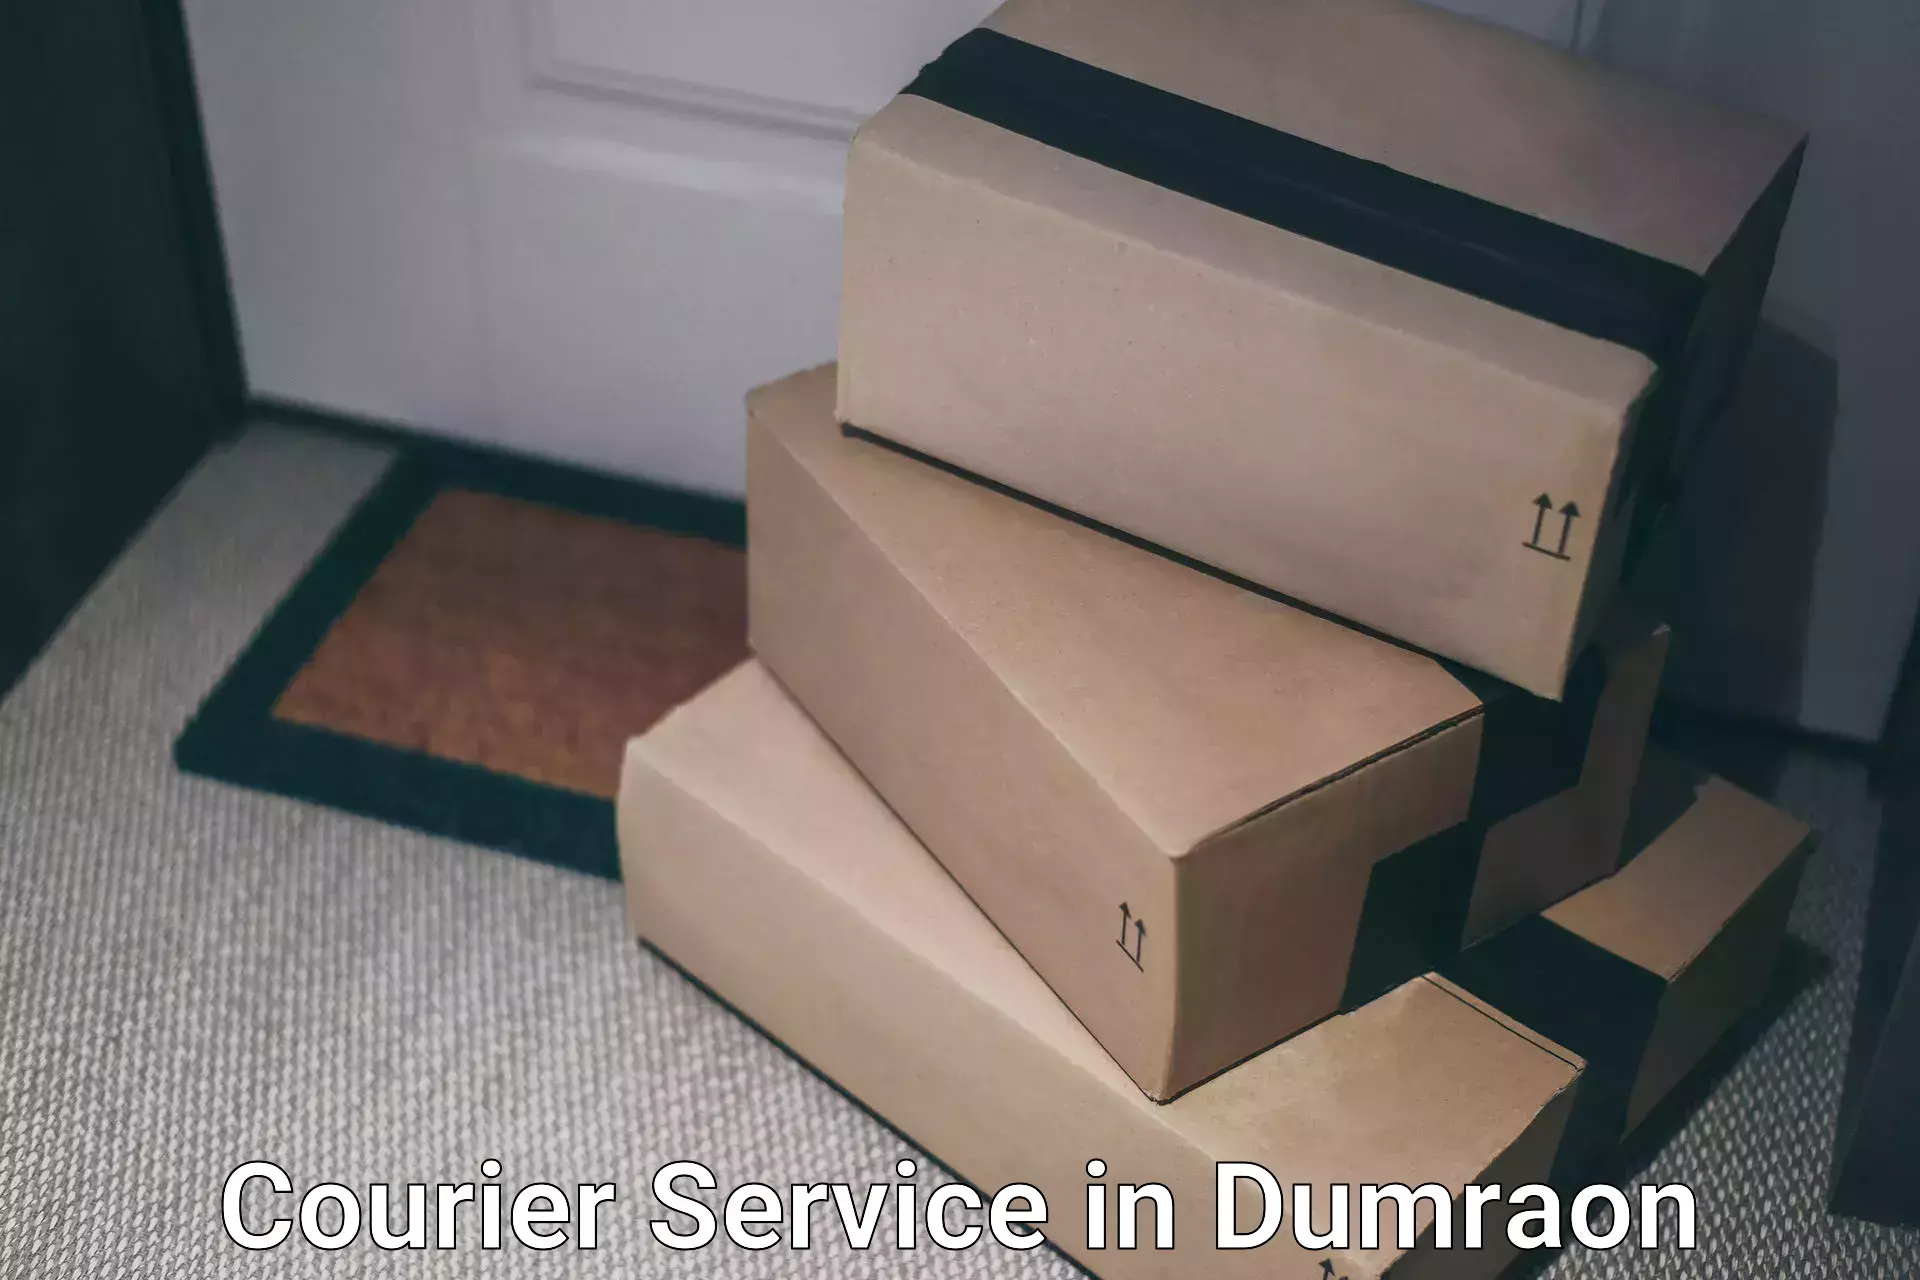 Reliable freight solutions in Dumraon